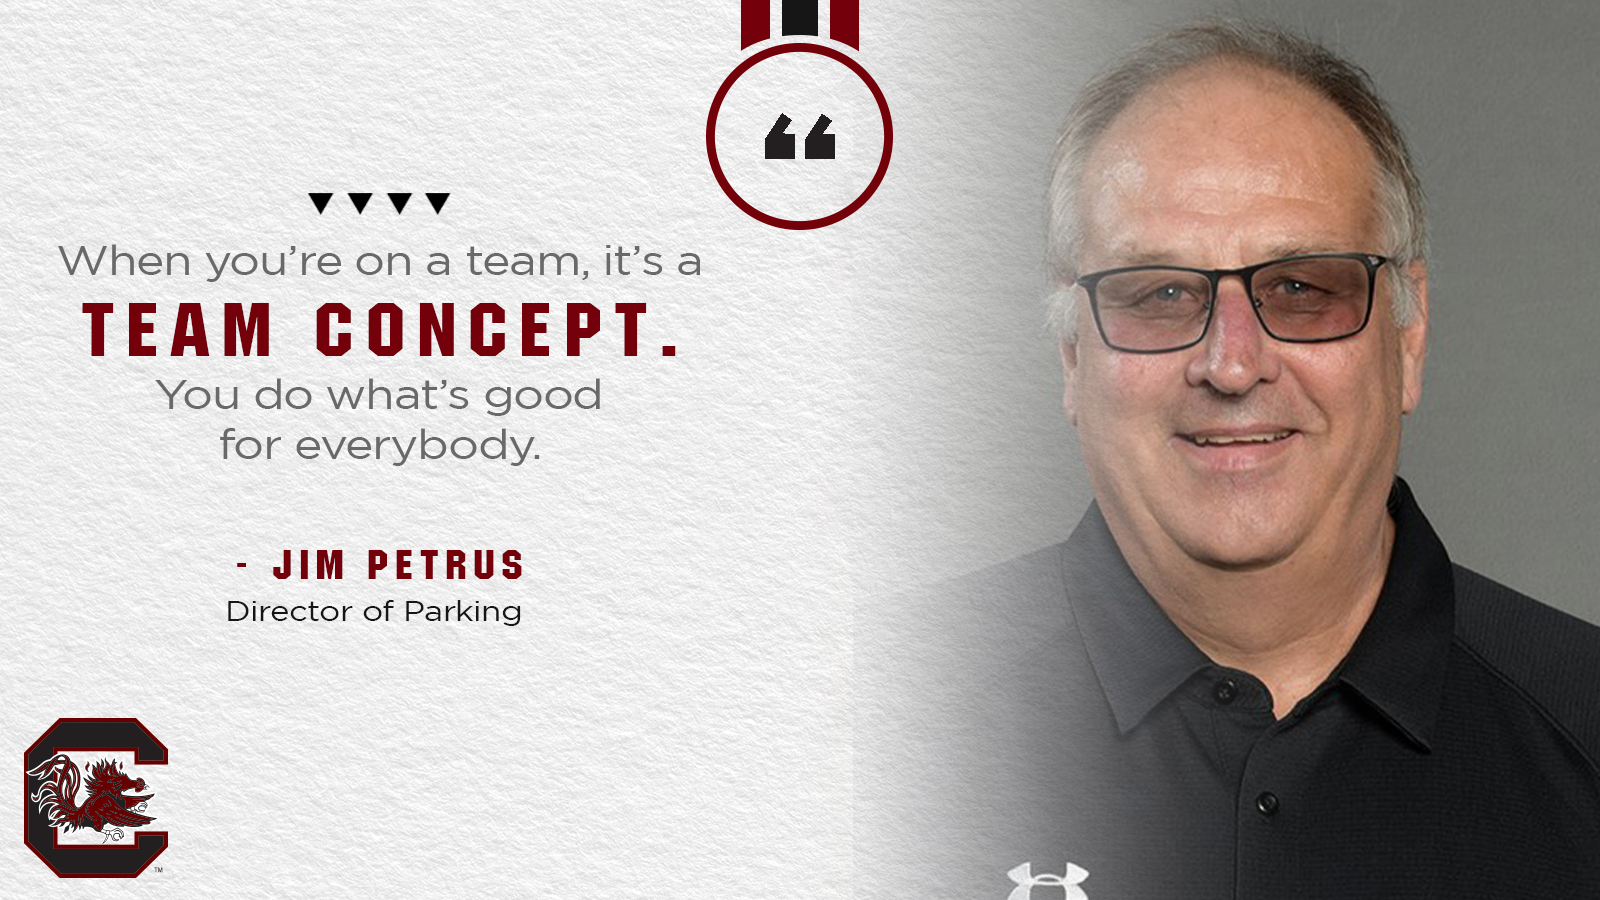 Jim Petrus Set to Retire After 44 Years with Athletics Dept.